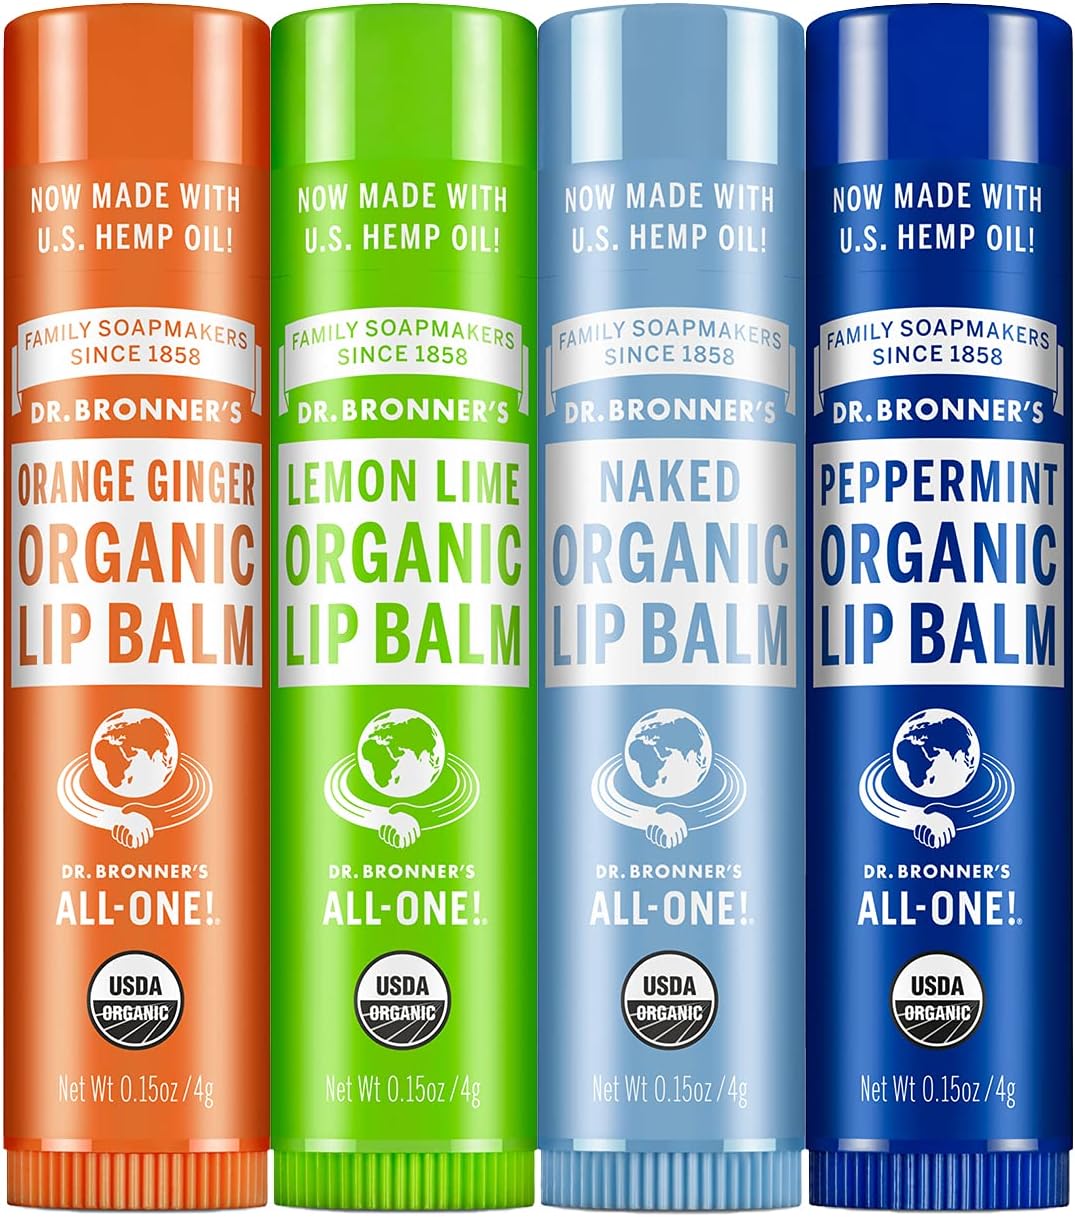 Dr. Bronner's - Organic Lip Balm Variety Peppermint, Orange Ginger, Naked, Lemon Lime) - Made with Organic Beeswax and Avocado Oil, For Dry Lips, Hands, Chin or Cheeks, 0.15 Ounce (Pack of 4)